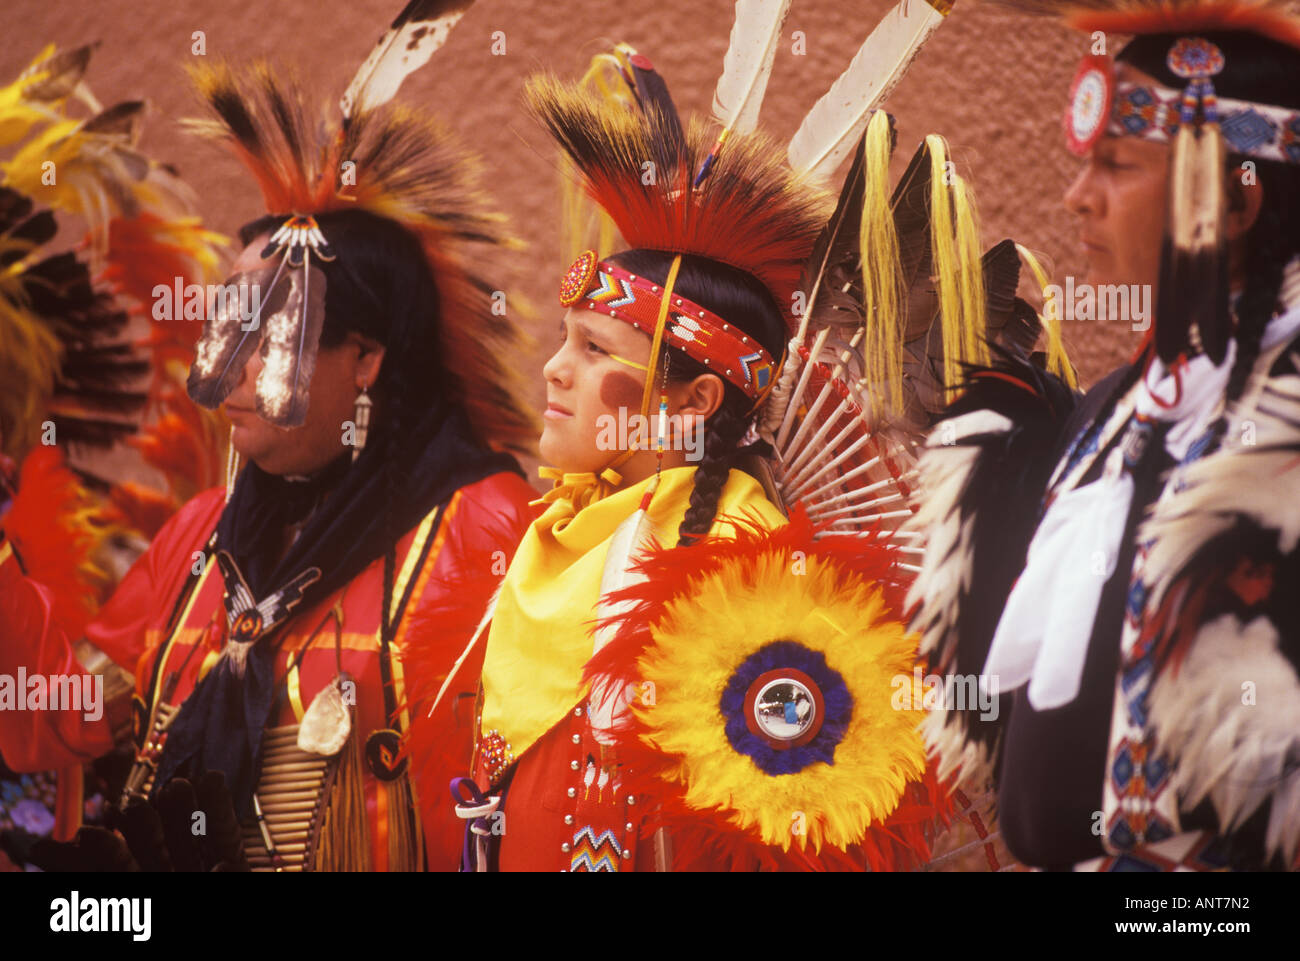 American Indian Kiowa Comanche Dancers Plains Indian Tribe Gallup Inter Tribal Indian Ceremonial Gallup New Mexico Stock Photo